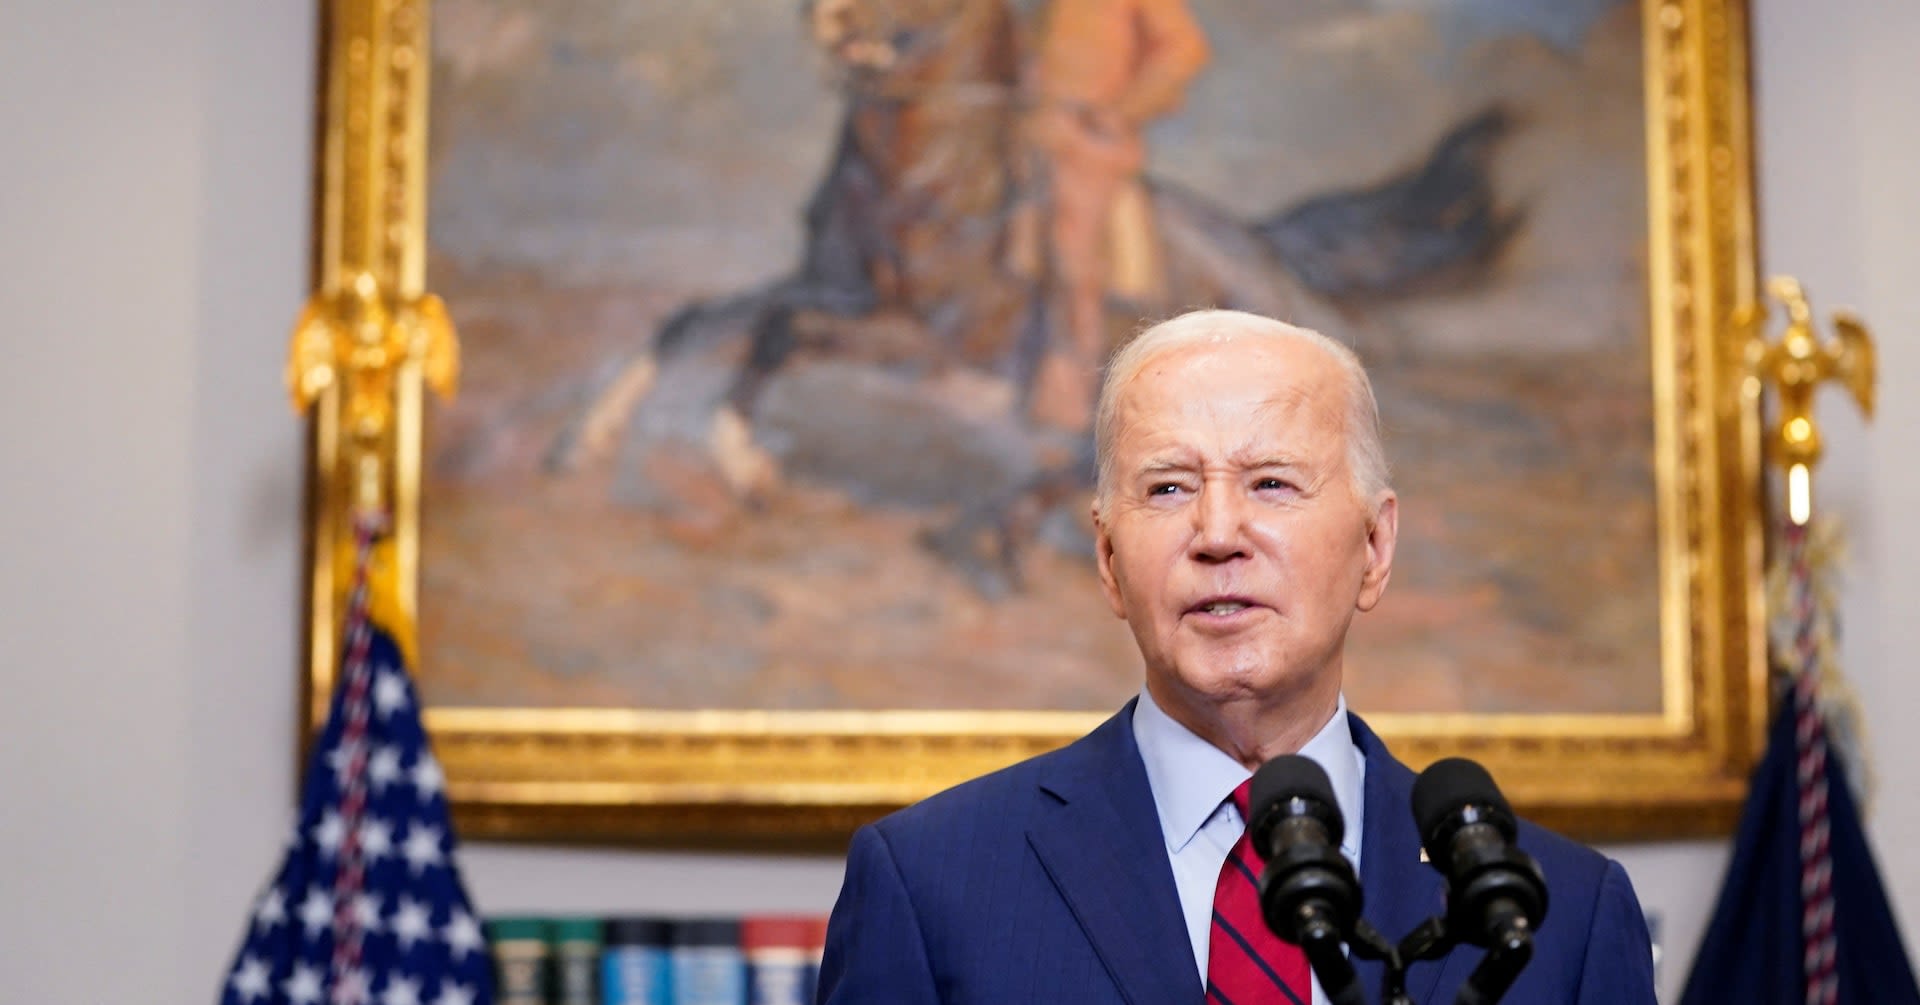 Biden breaks silence on college protests over Gaza conflict